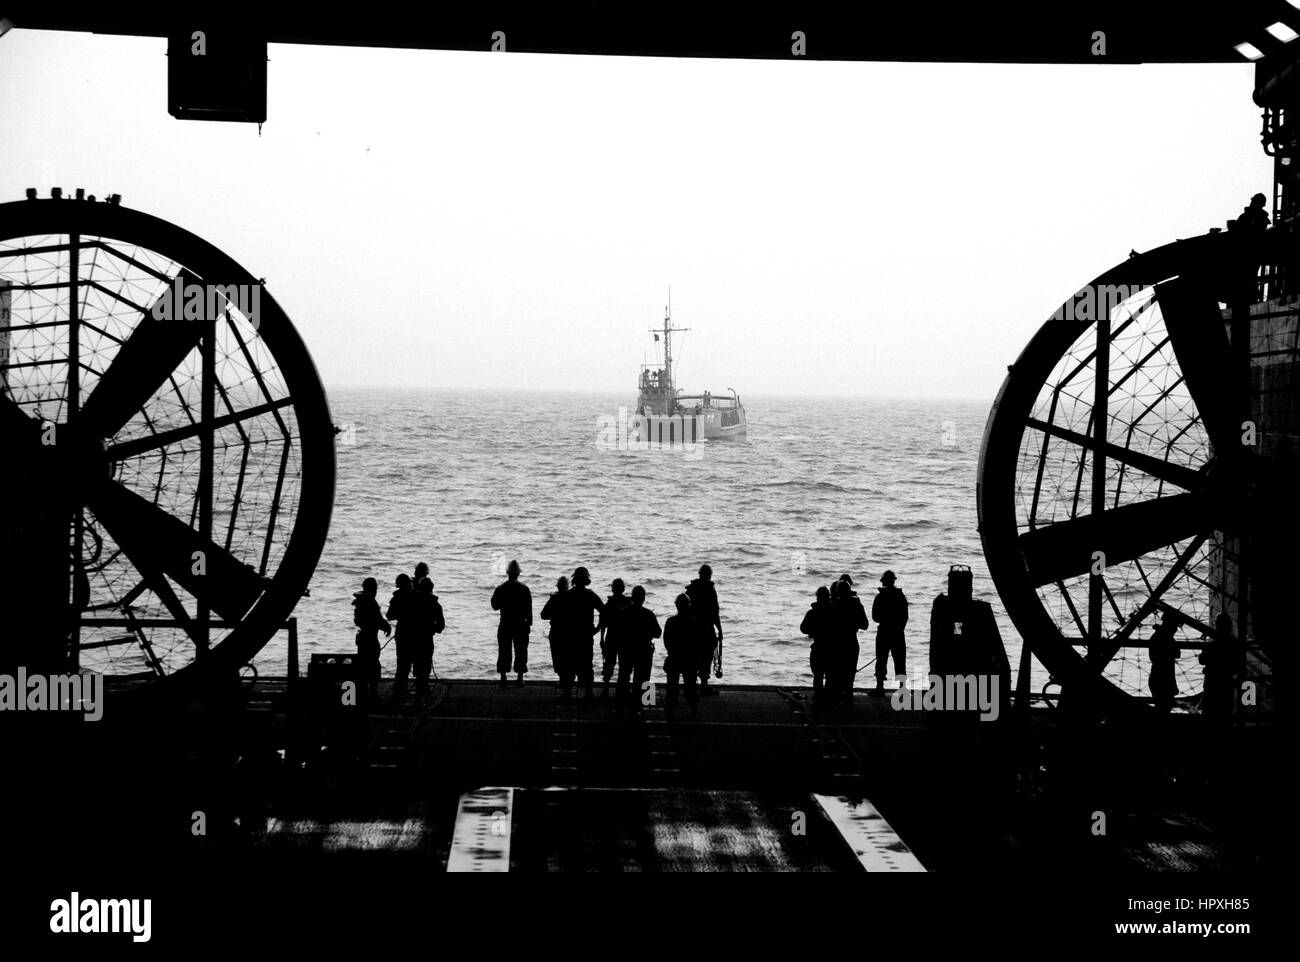 Sailors wait to perform a stern gate marriage with a utility landing craft in the well deck of the amphibious transport dock ship USS Green Bay, January 8, 2013. Image courtesy US Navy Mass Communication Specialist 1st Class Elizabeth Merriam. Stock Photo